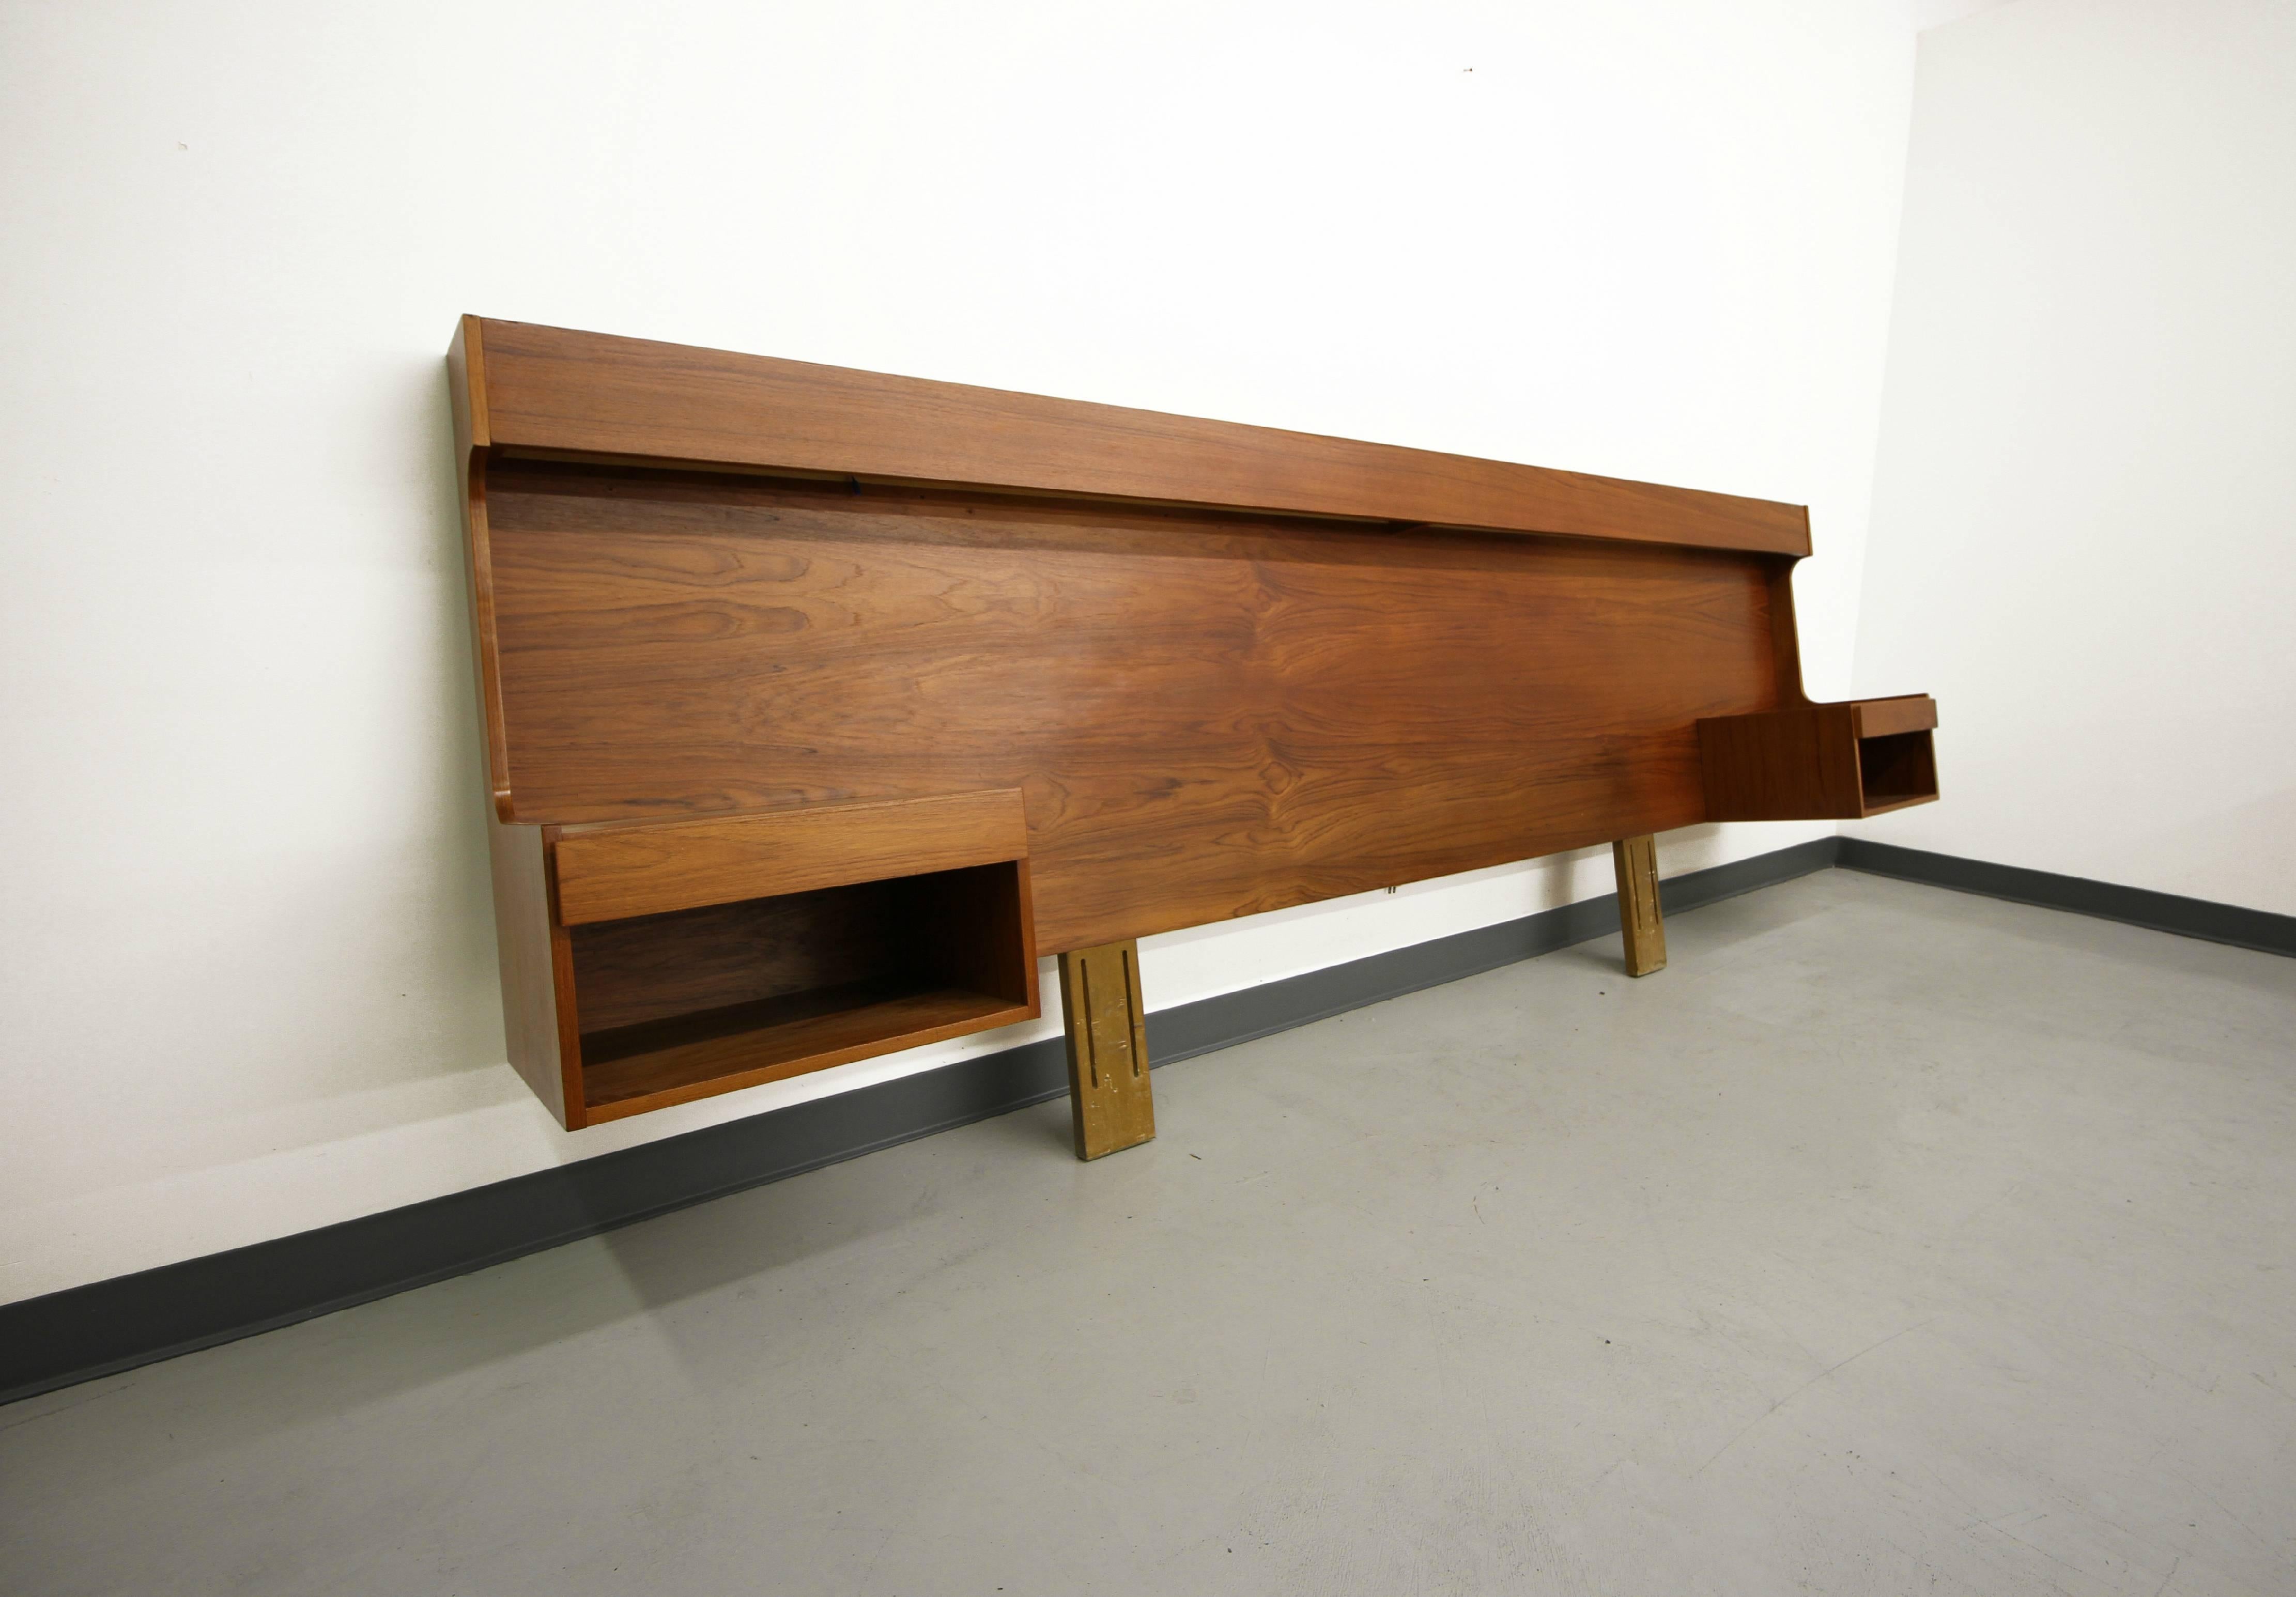 This a rare king-size Mid-Century Danish teak headboard with floating nightstands. The headboard also features hidden lights for your bed time working and reading needs. This headboard is large, and in charge, measuring almost 10ft wide, and ready